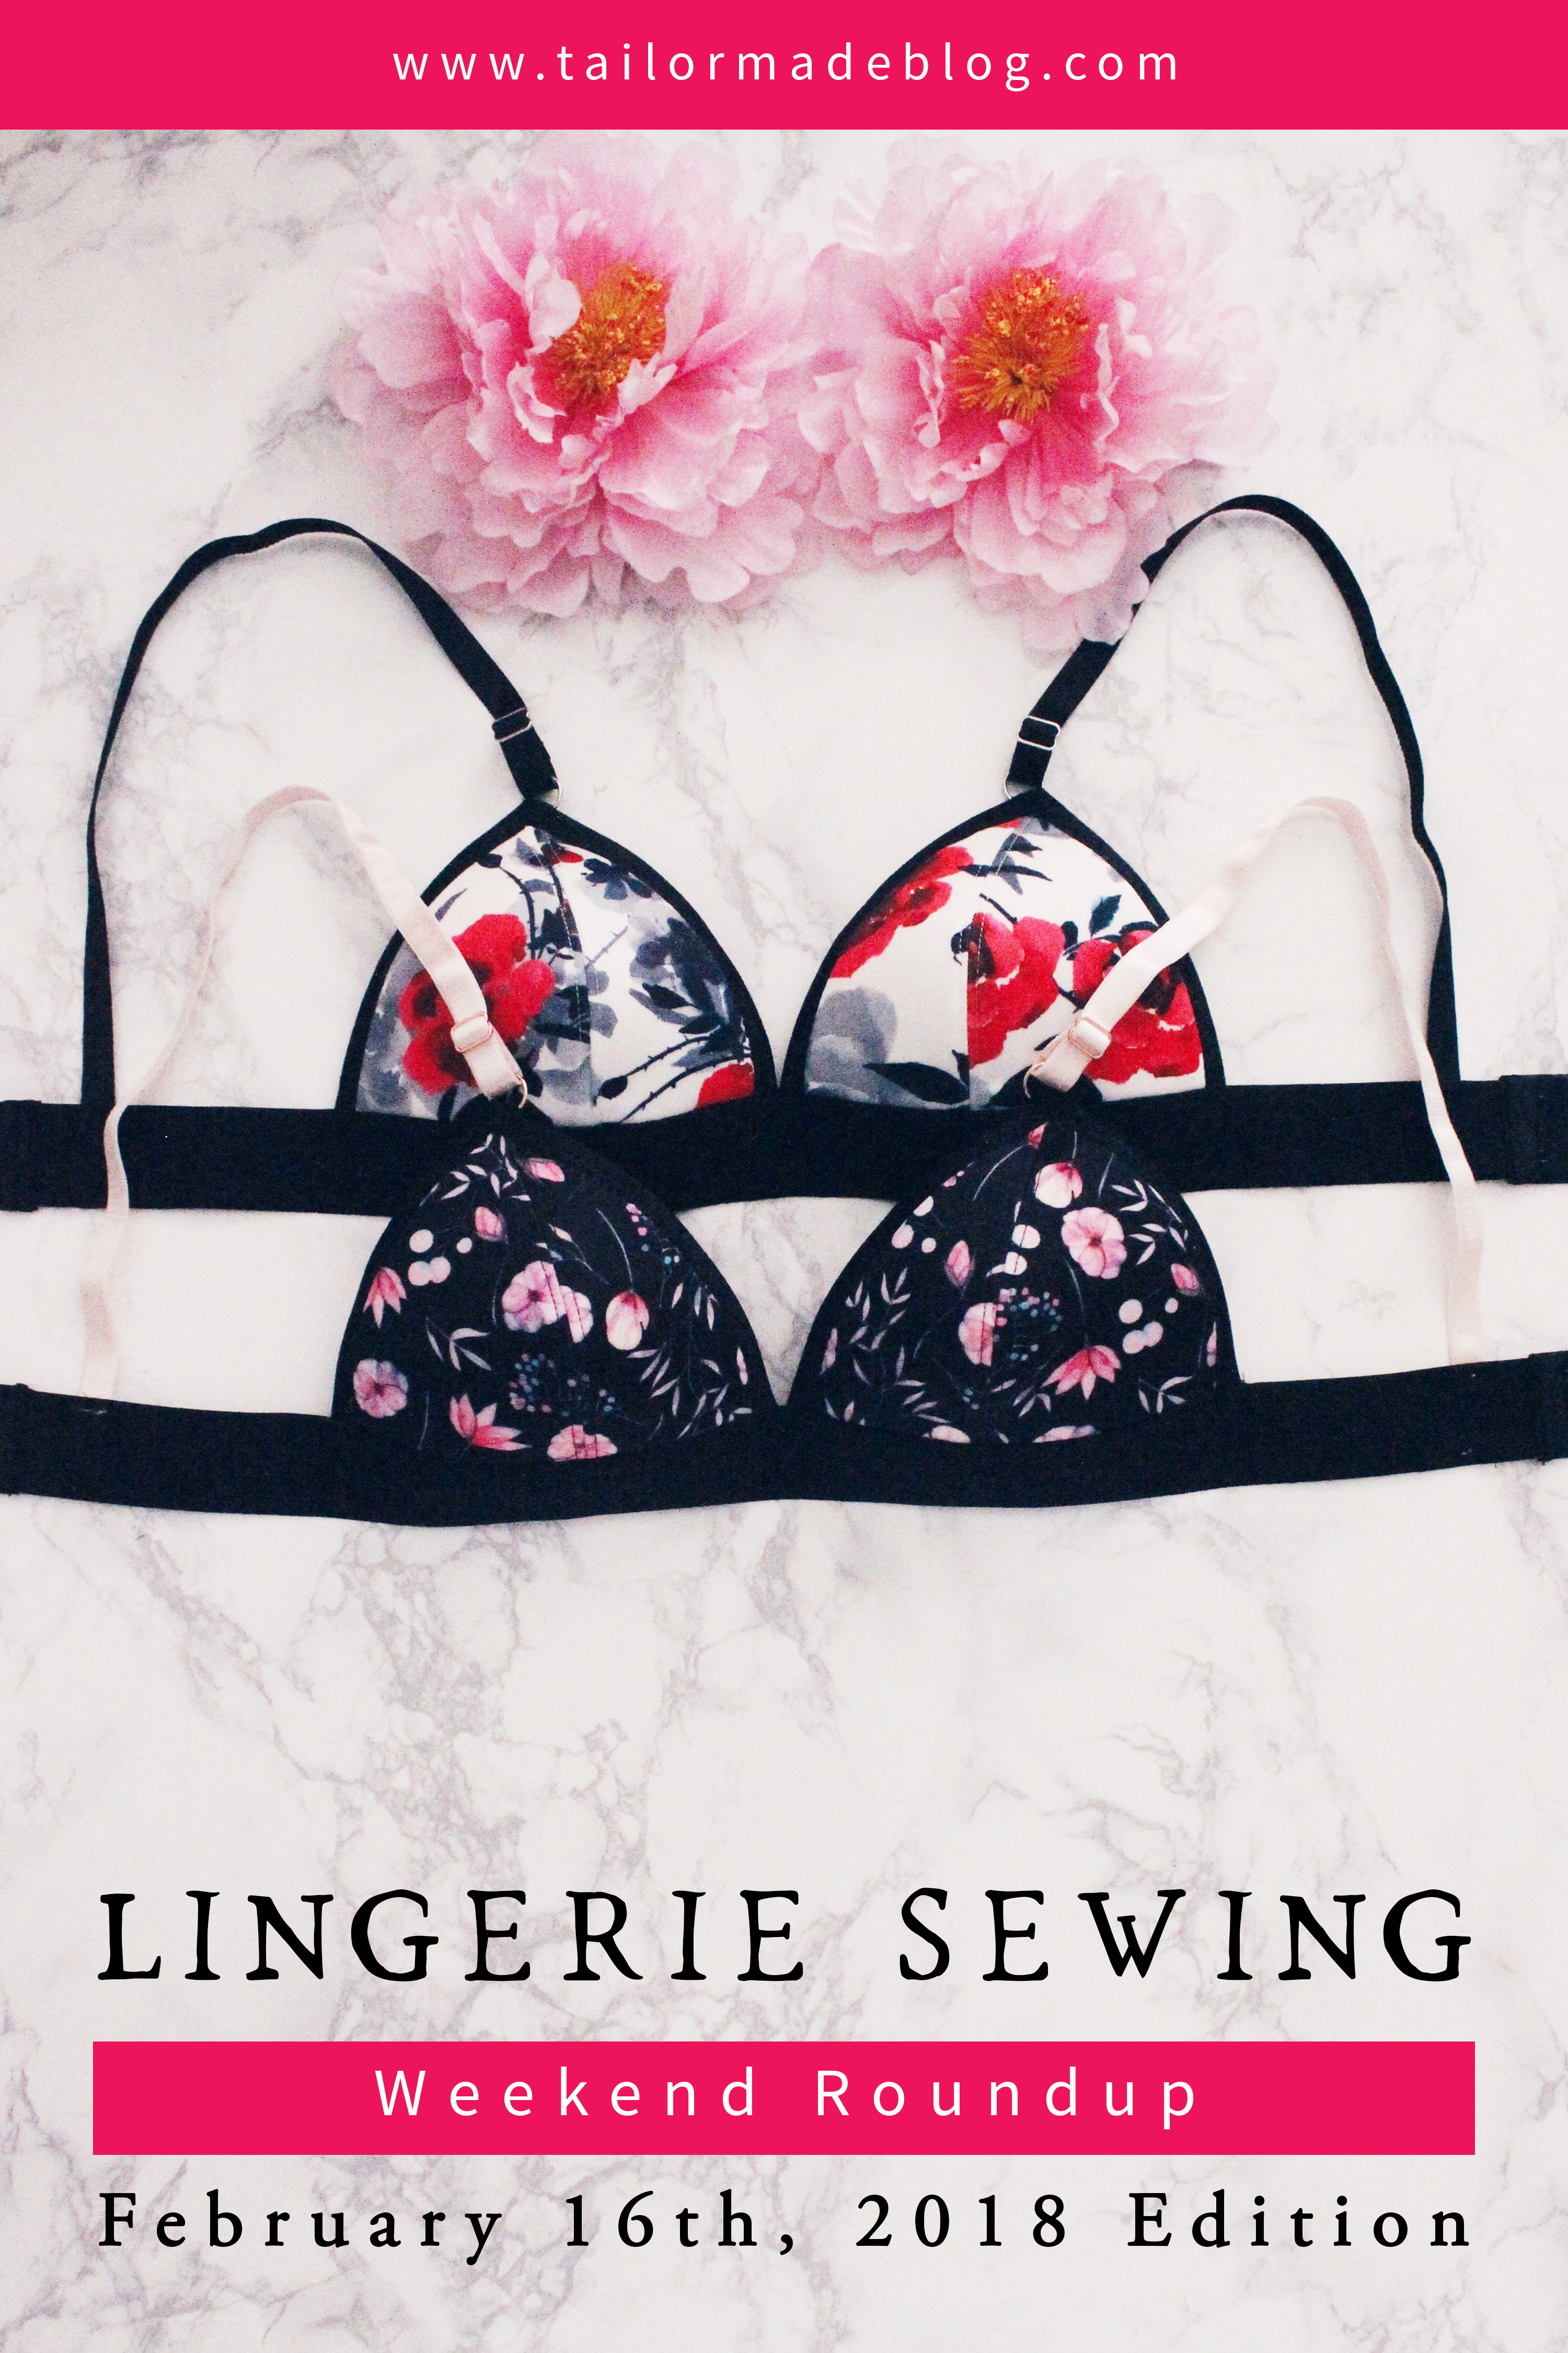 February 16th 2018 Lingerie Sewing Weekend Round Up Latest news and makes and sewing projects from the lingerie sewing bra making community